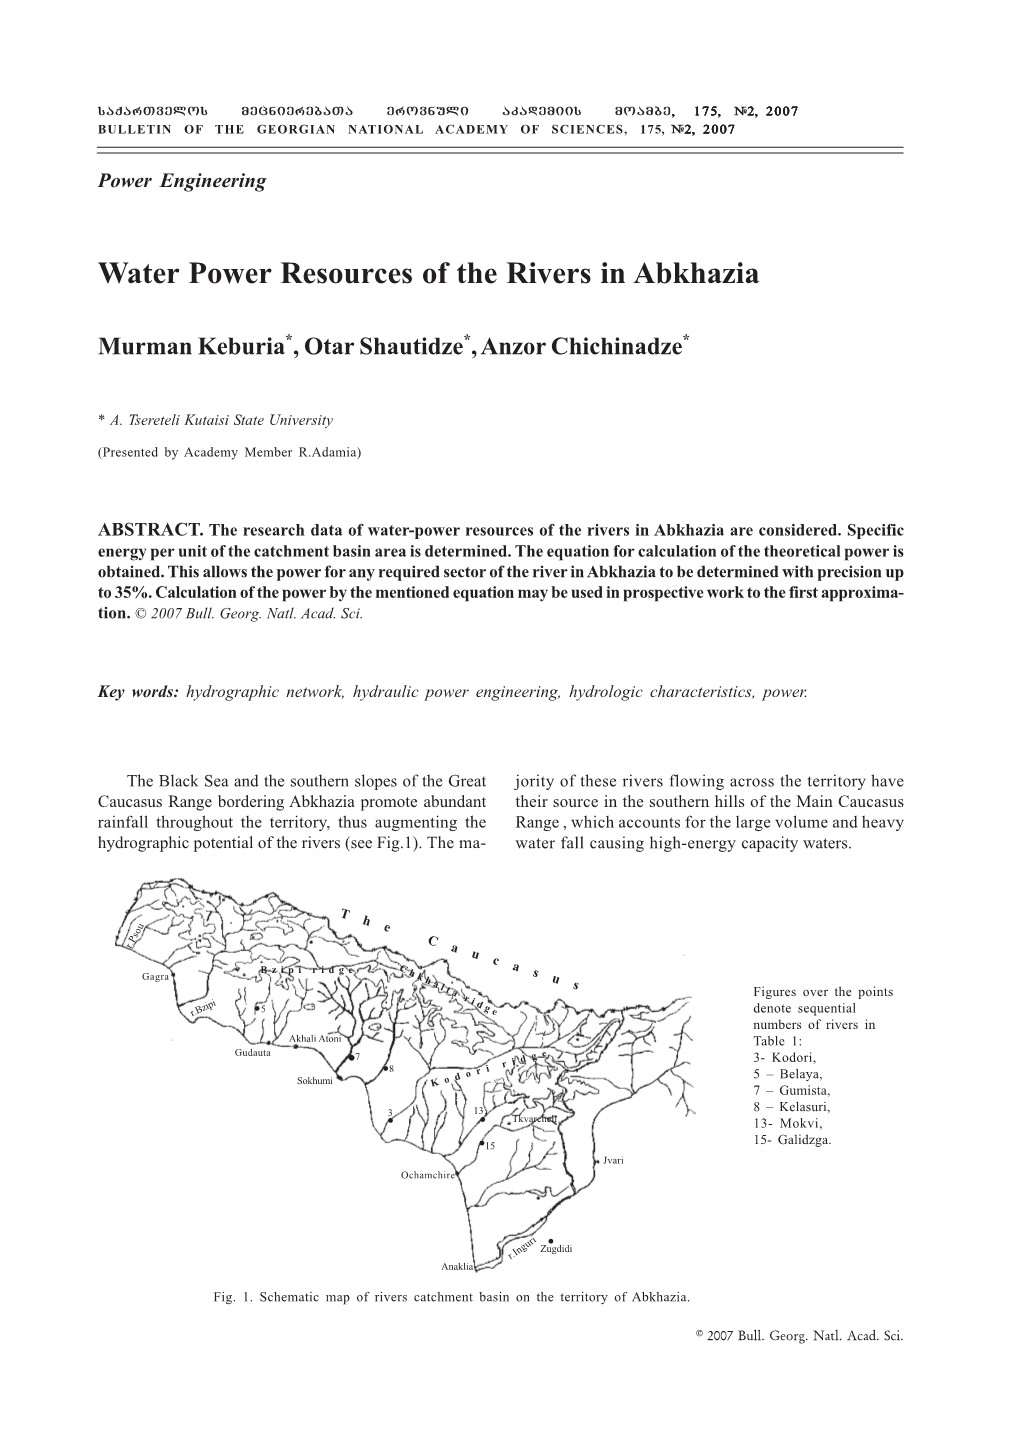 Water Power Resources of the Rivers in Abkhazia